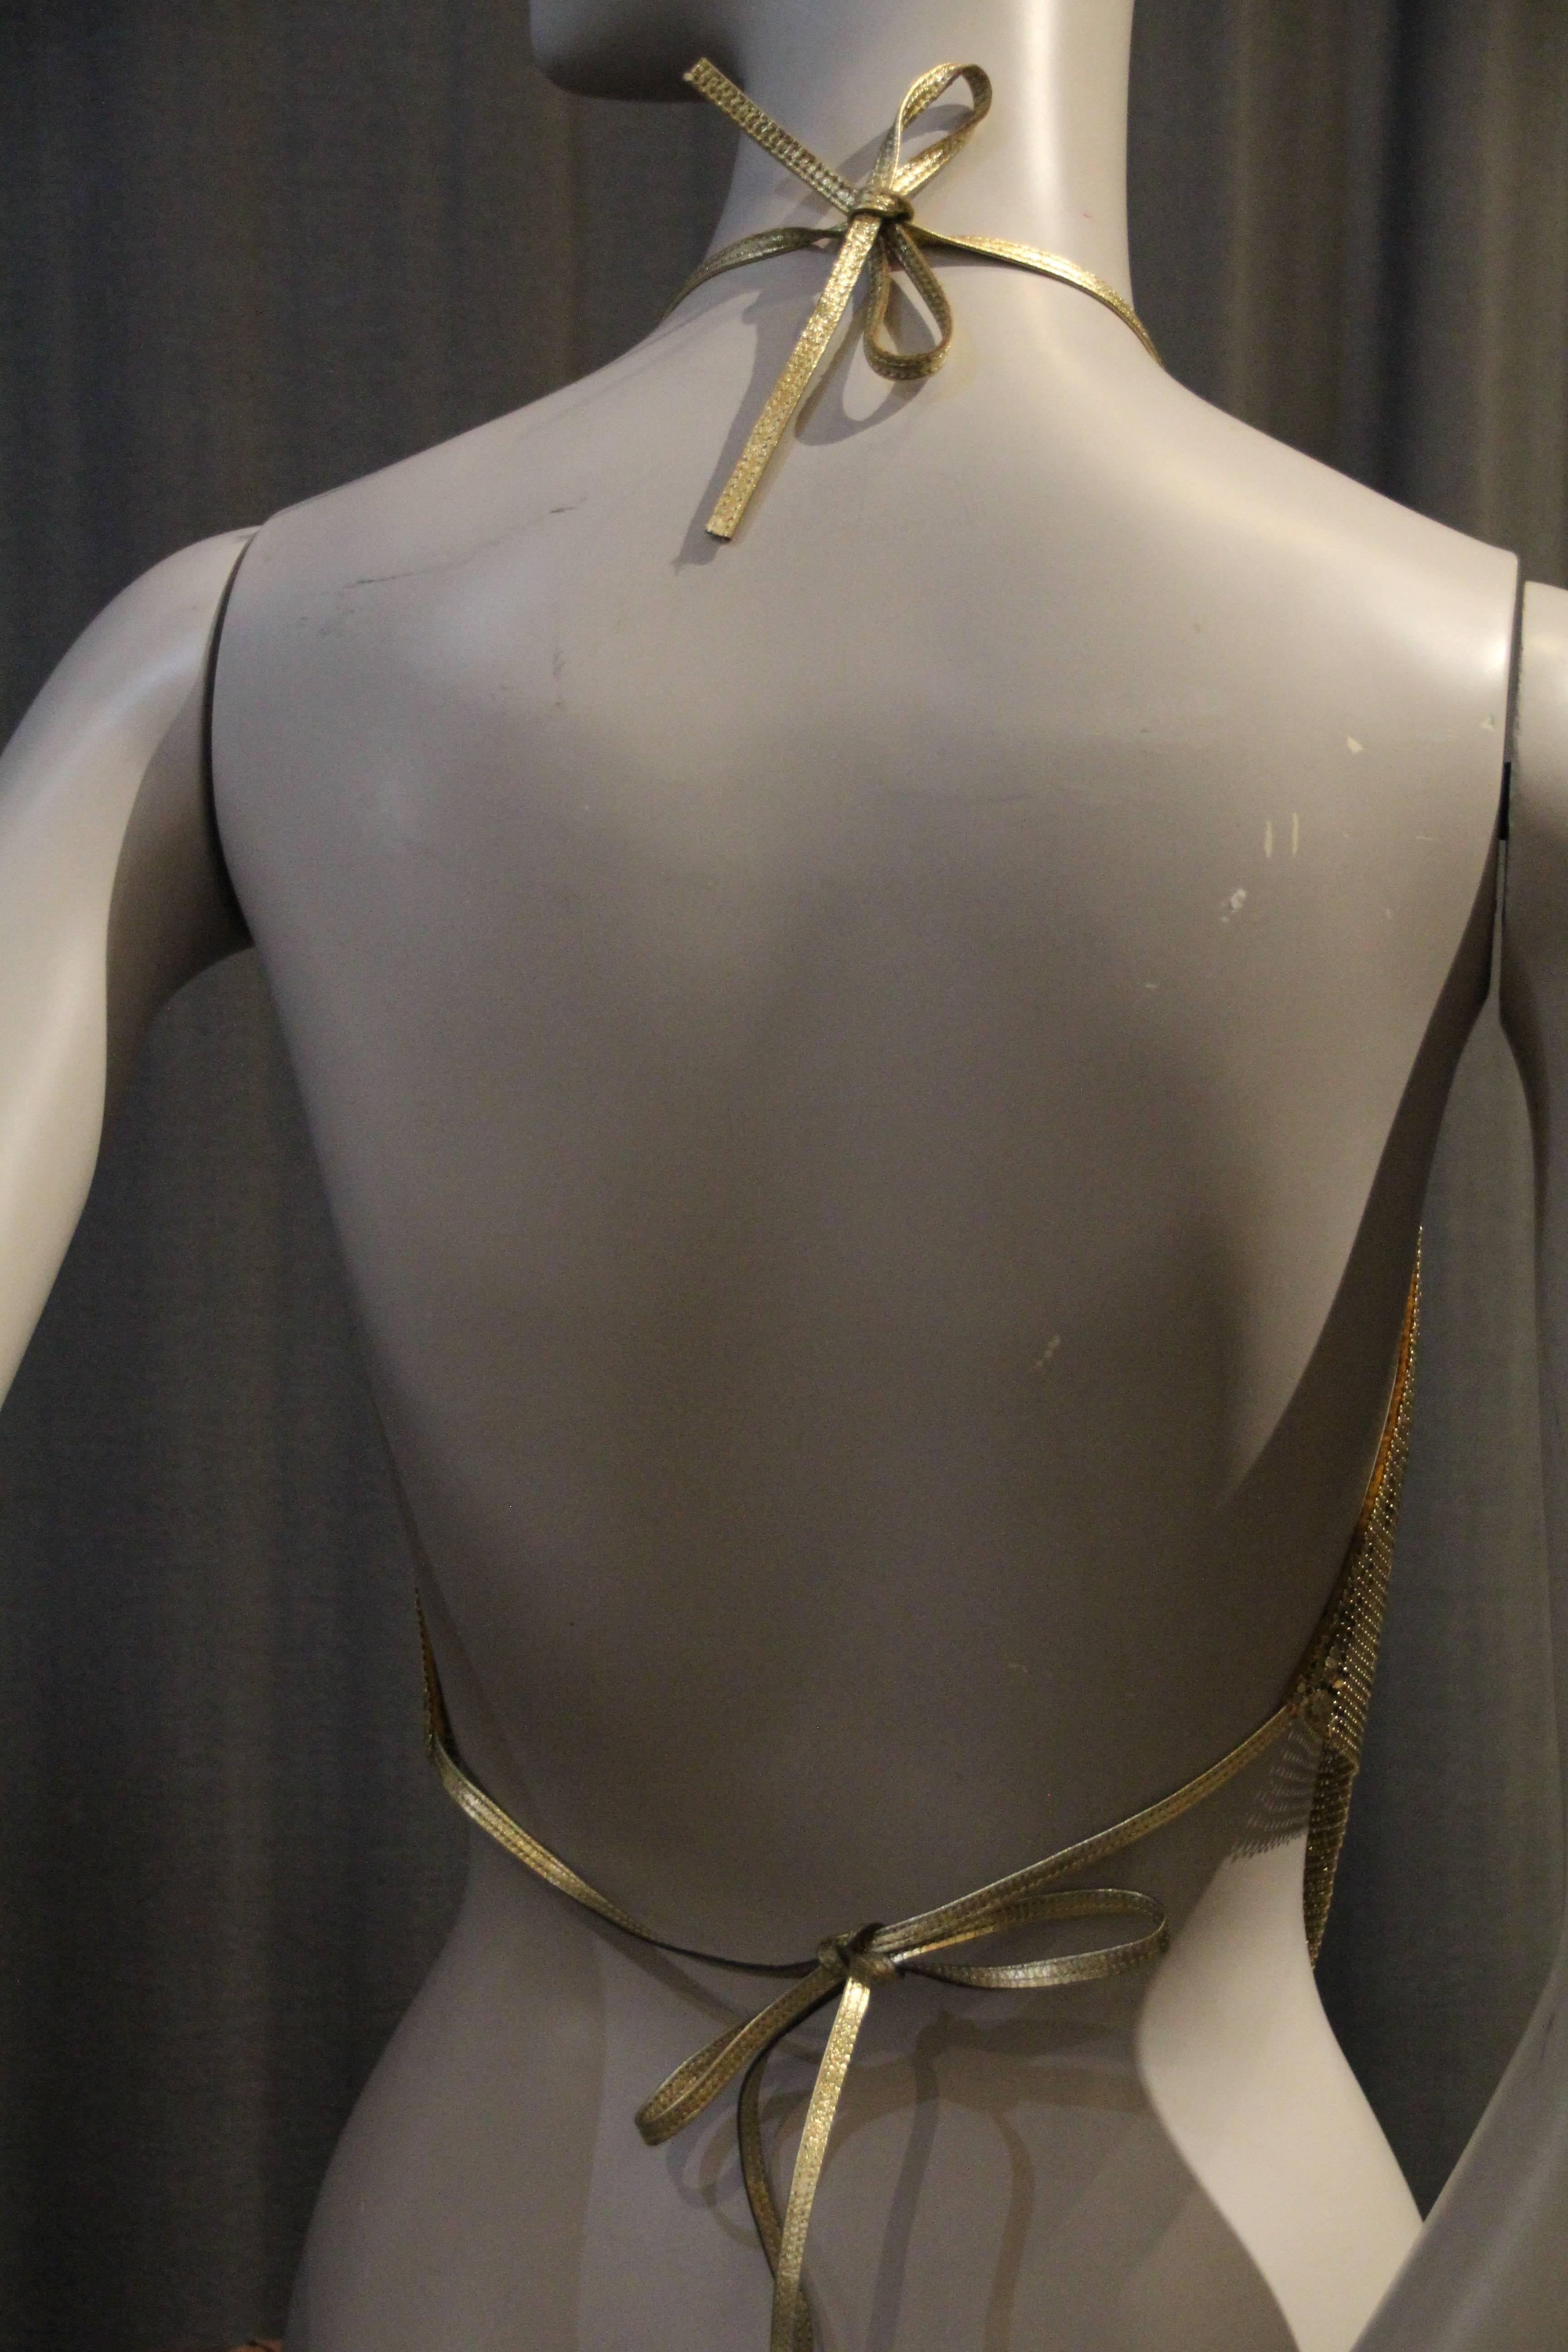 A 1970s Whiting and Davis gold metal mesh bias drape halter top: Seriously sexy and daring molten metal look, with gold metallic leather straps that tie at neckline and at waist!   